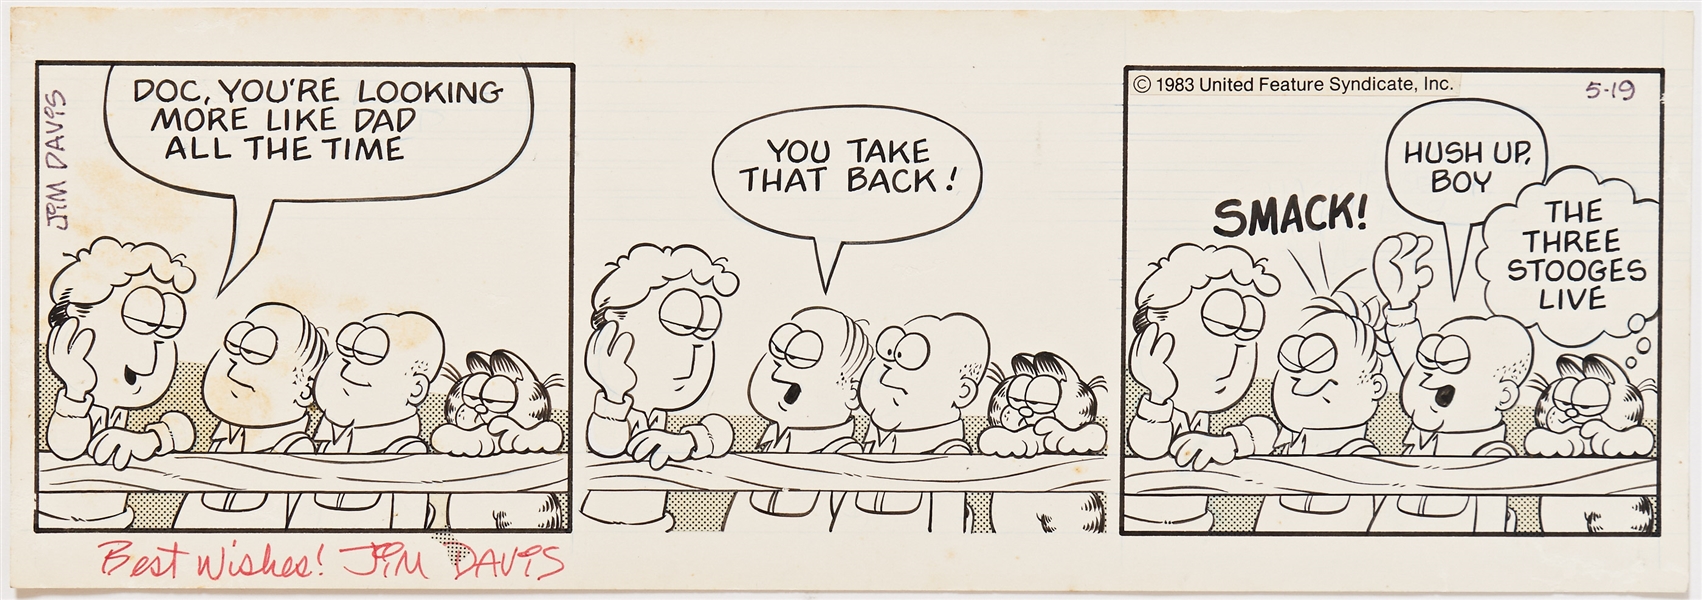 Jim Davis Signed ''Garfield'' Comic Strip Original Art with Three Stooges Content -- Published 19 May 1983, with United Feature Syndicate Label on Last Panel -- Measures 14.5'' x 5'' -- Very Good Plus